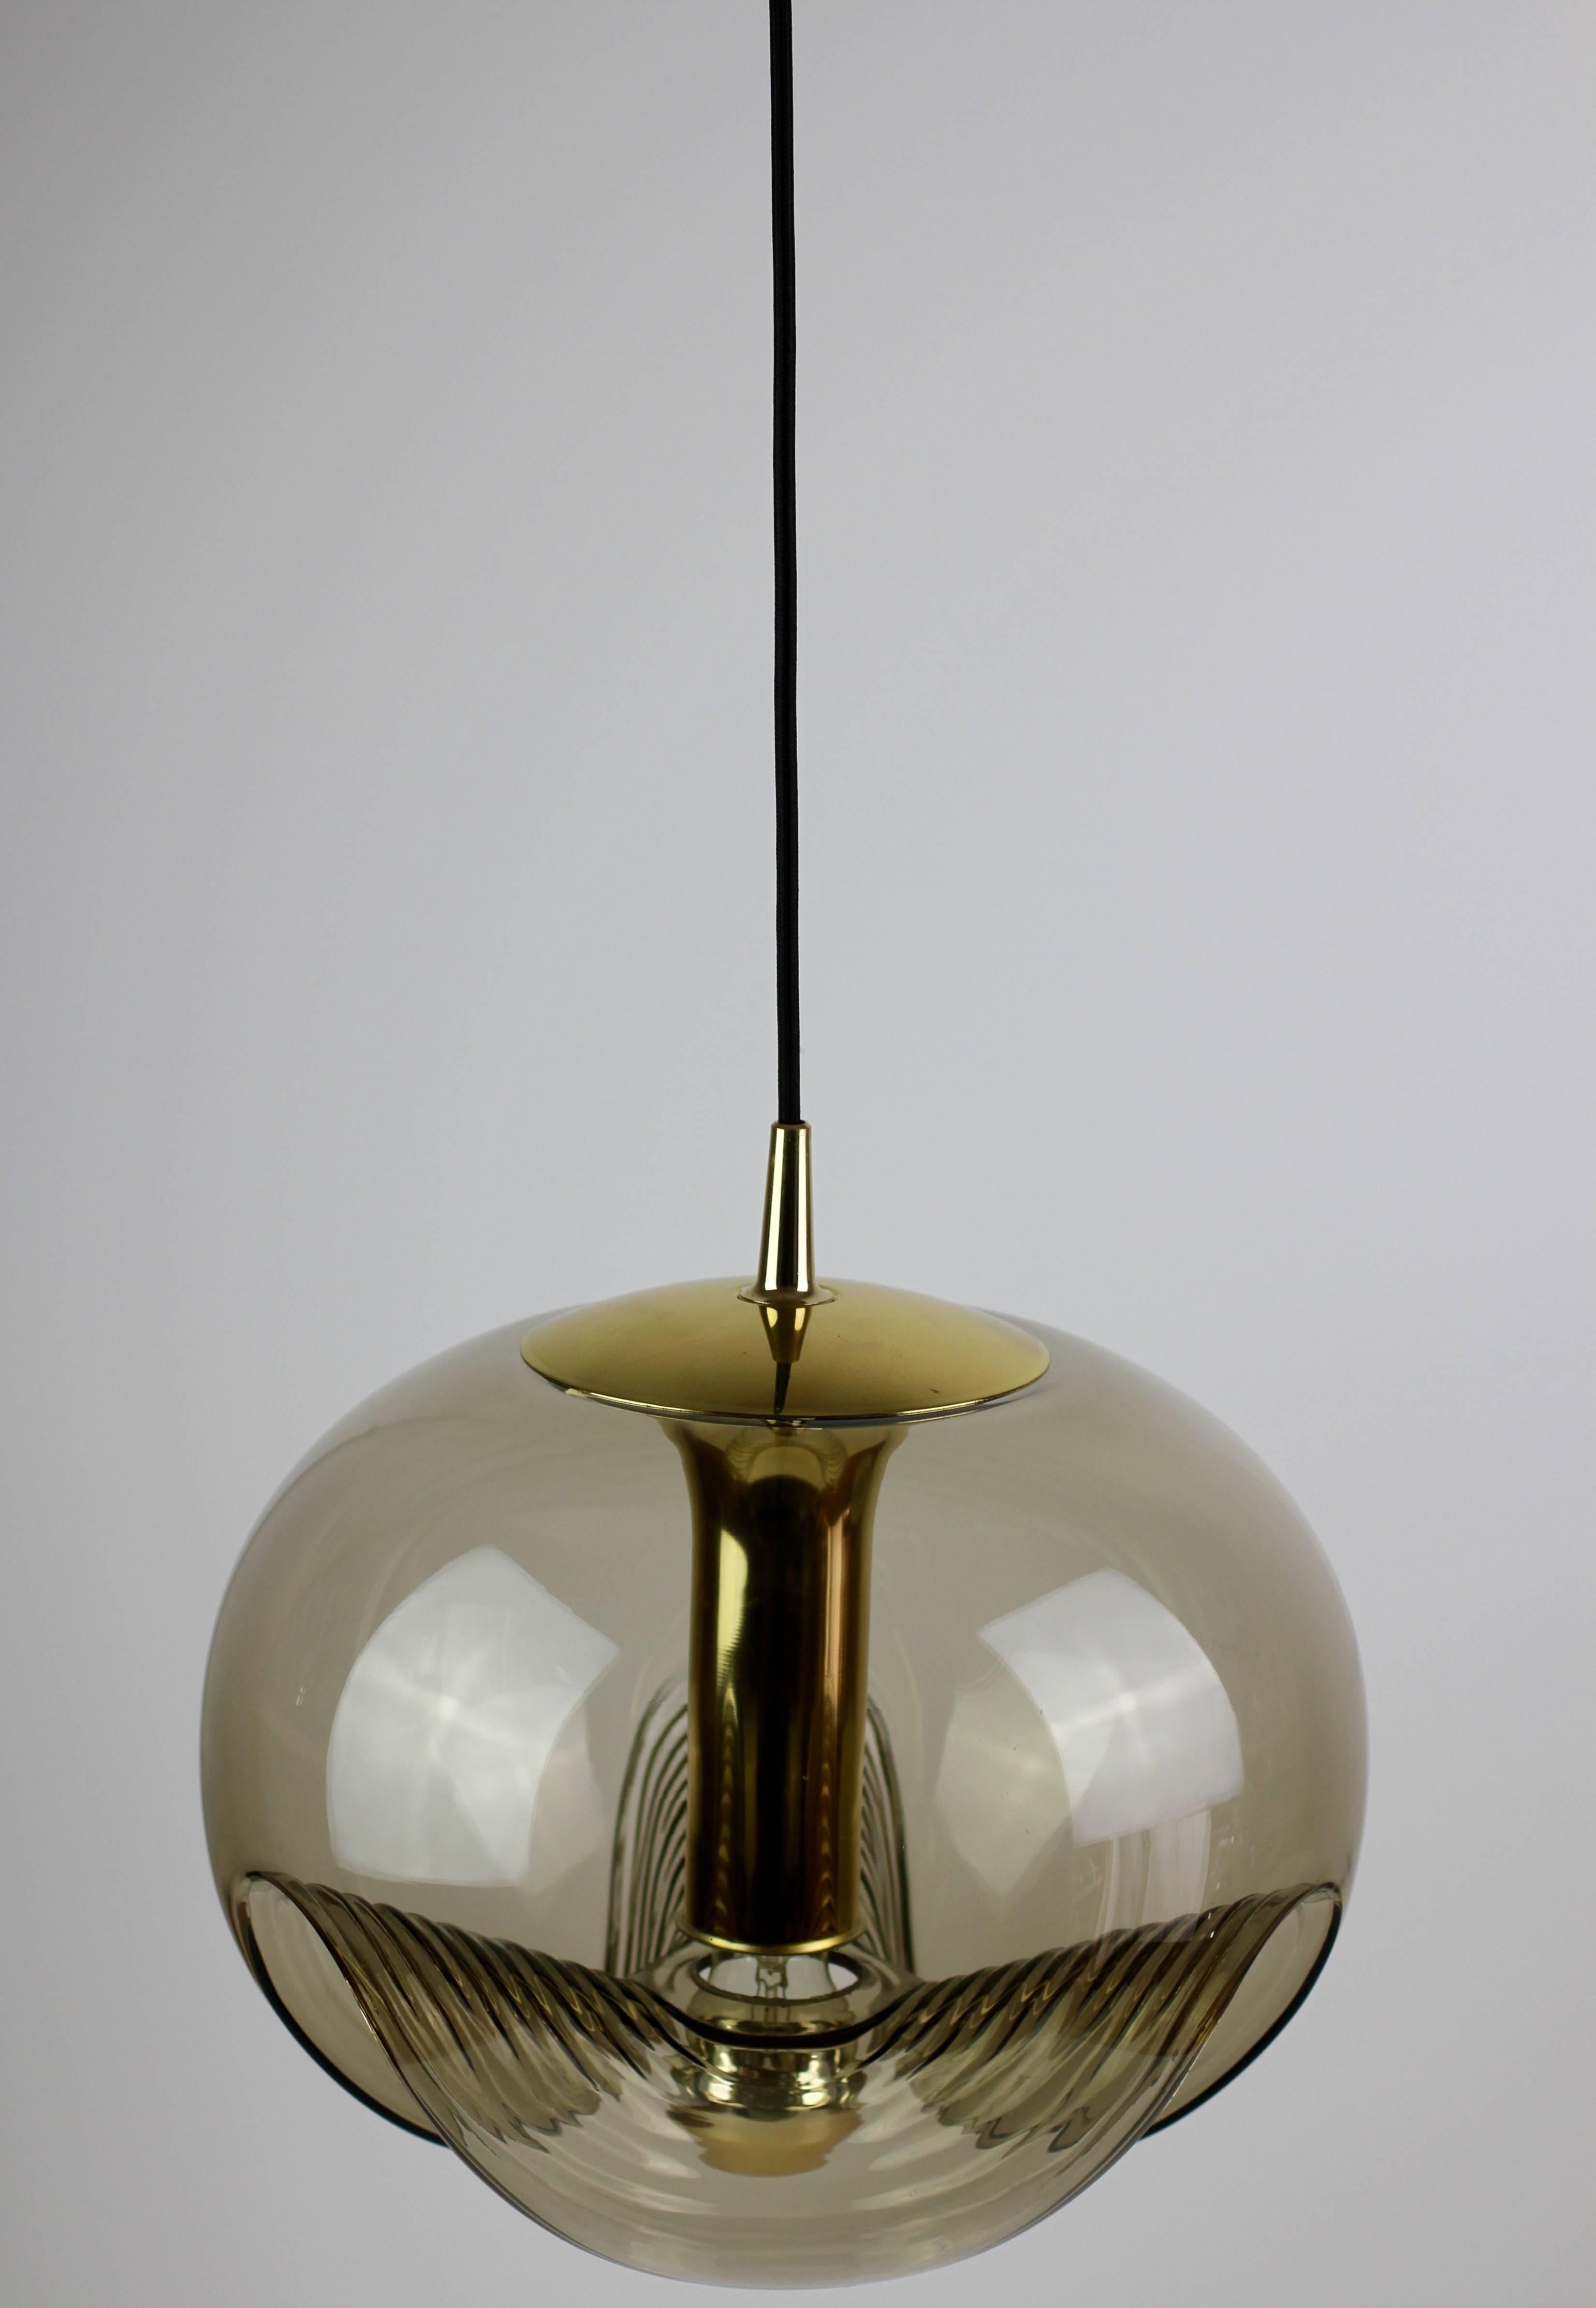 Beautiful midcentury design by Koch & Lowy for Peill & Putzler in the 1970s. This is an absolutely Classic piece of design, featuring a smoked colored (colored) glass globe shade with a waved/ribbed moulded bubble form, casting a beautiful rippled